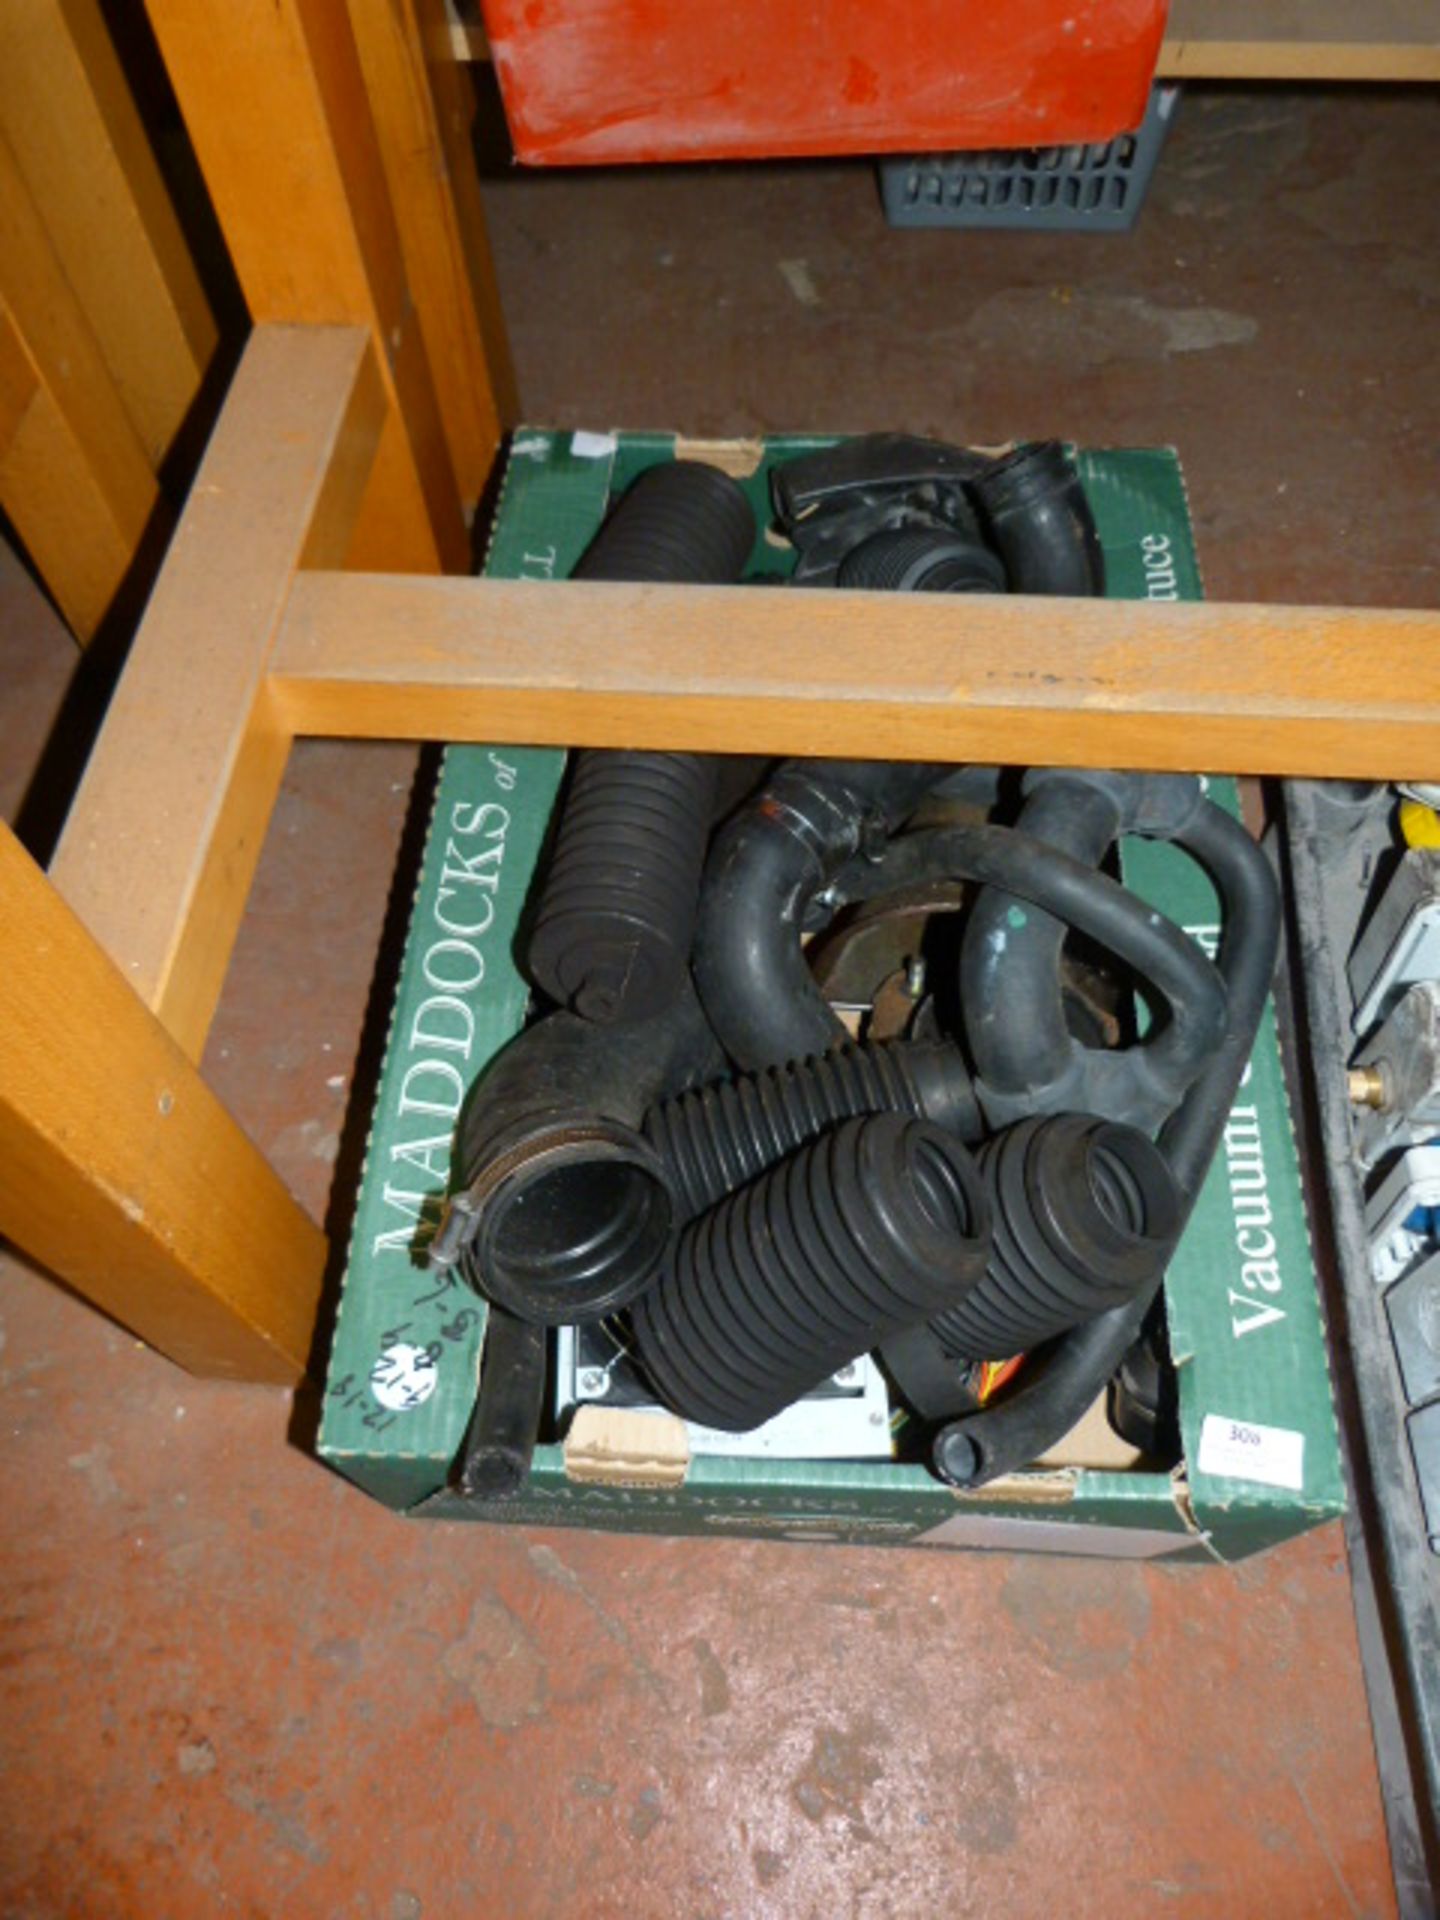 Assorted Rubber Boots and Hoses